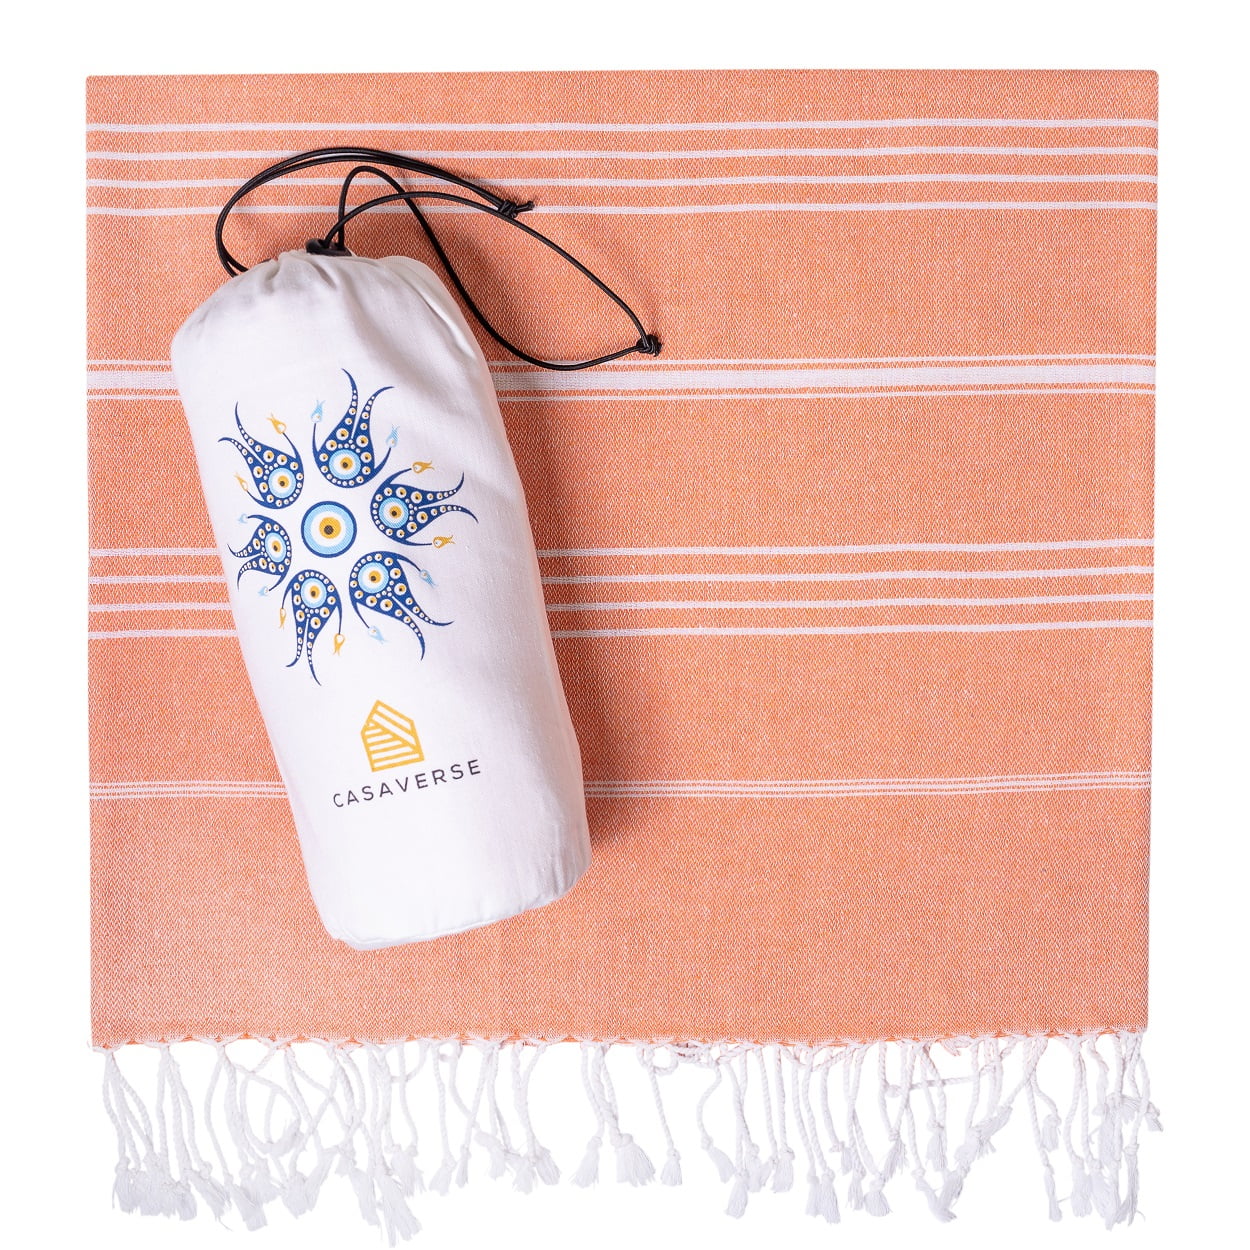  Gold CASE Turkish Beach Towel LYCIA - 38x70 inches XXL  Oversized Bath Towels 100% Cotton Quick Dry, Sand Free - with Free Reusable  Bag Gift - PRE-Washed Super Soft (Lycia-Orange) 